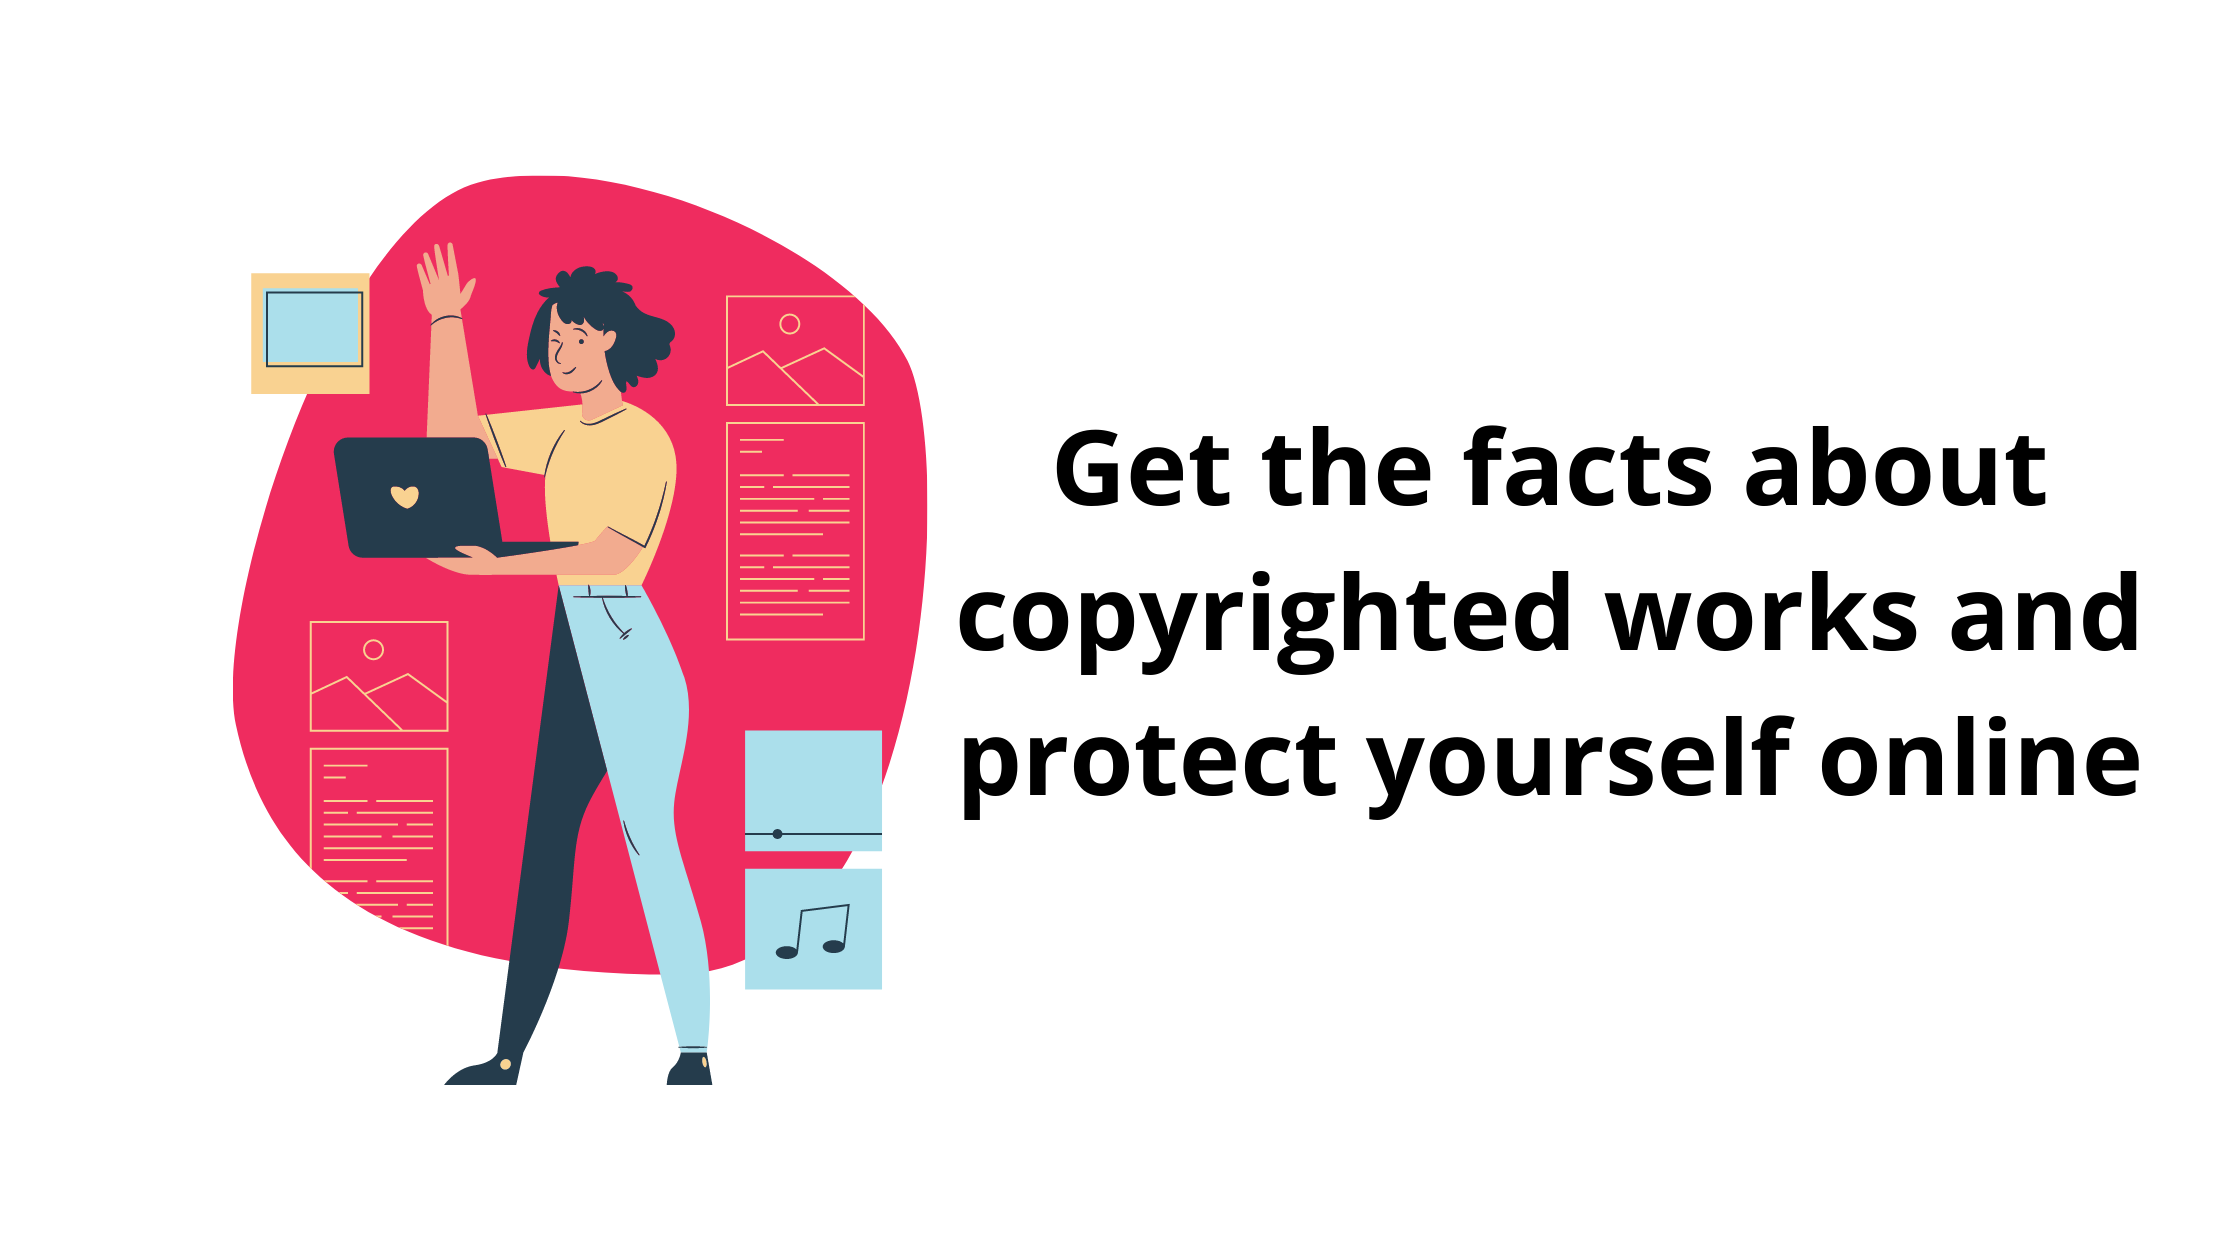 Get the facts about copyrighted works and protect yourself online